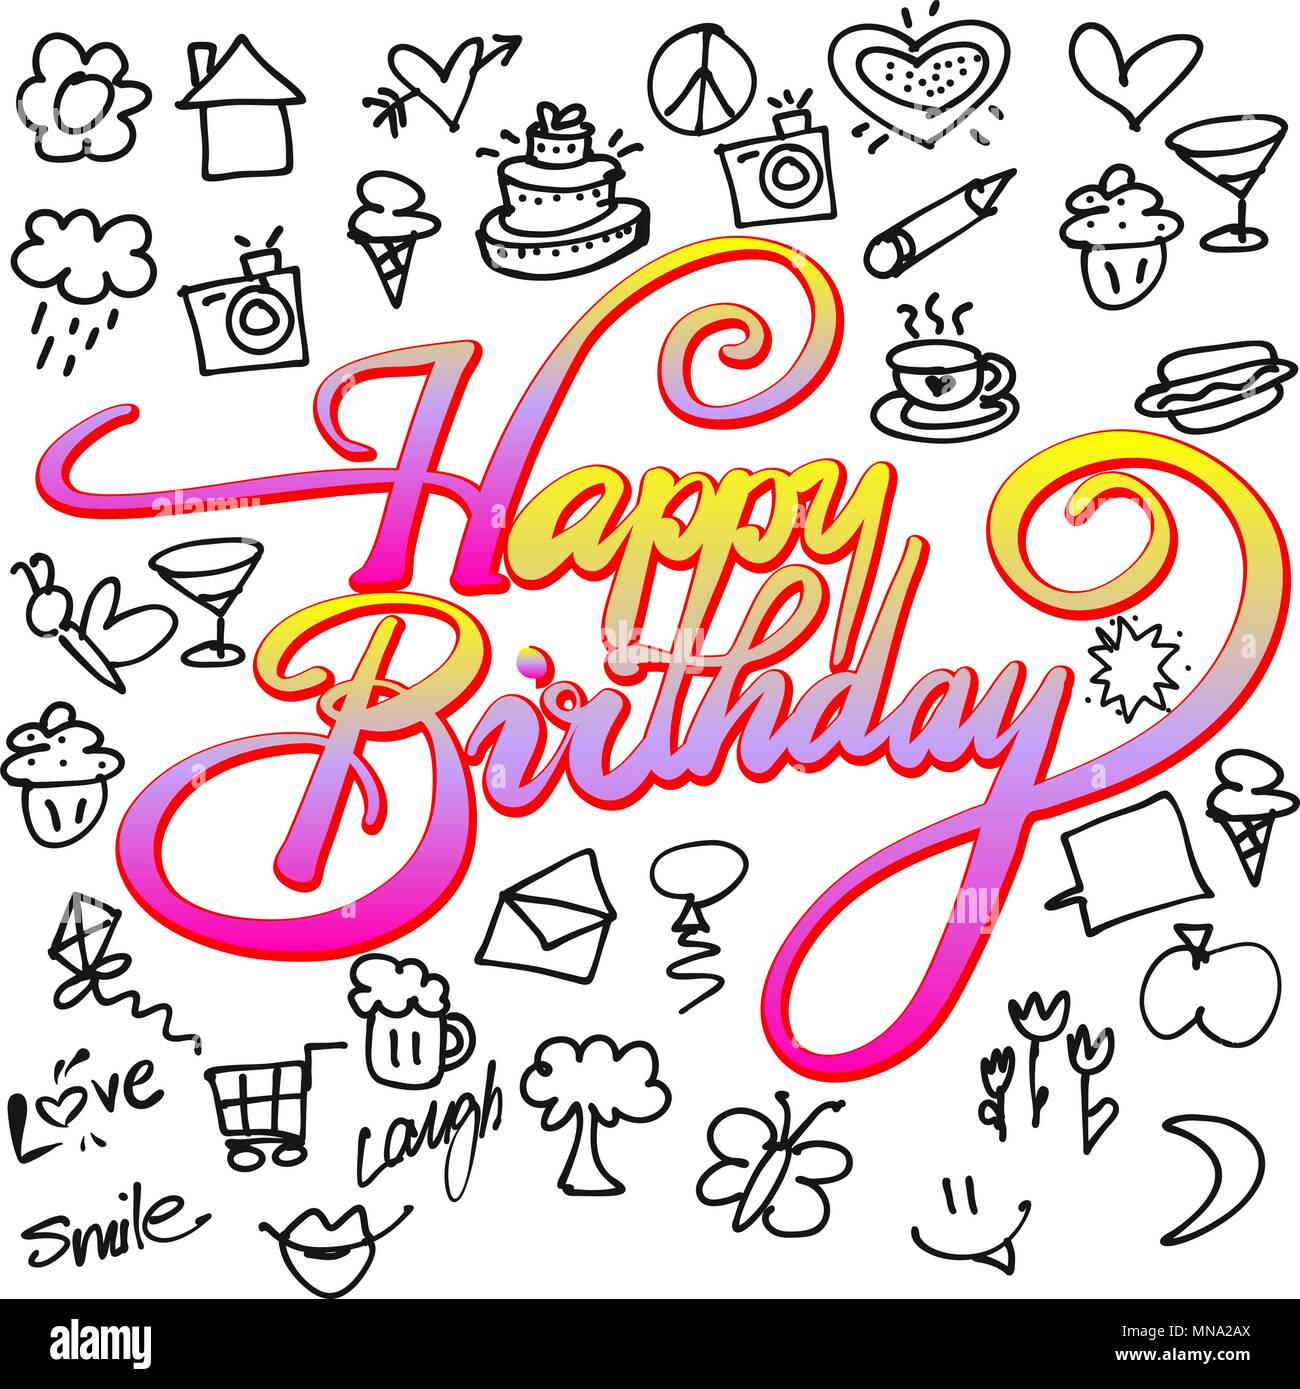 Happy birthday Icons and Doodles, Hand drawn Vector Calligraphy Greeting Card Concept Stock Vector